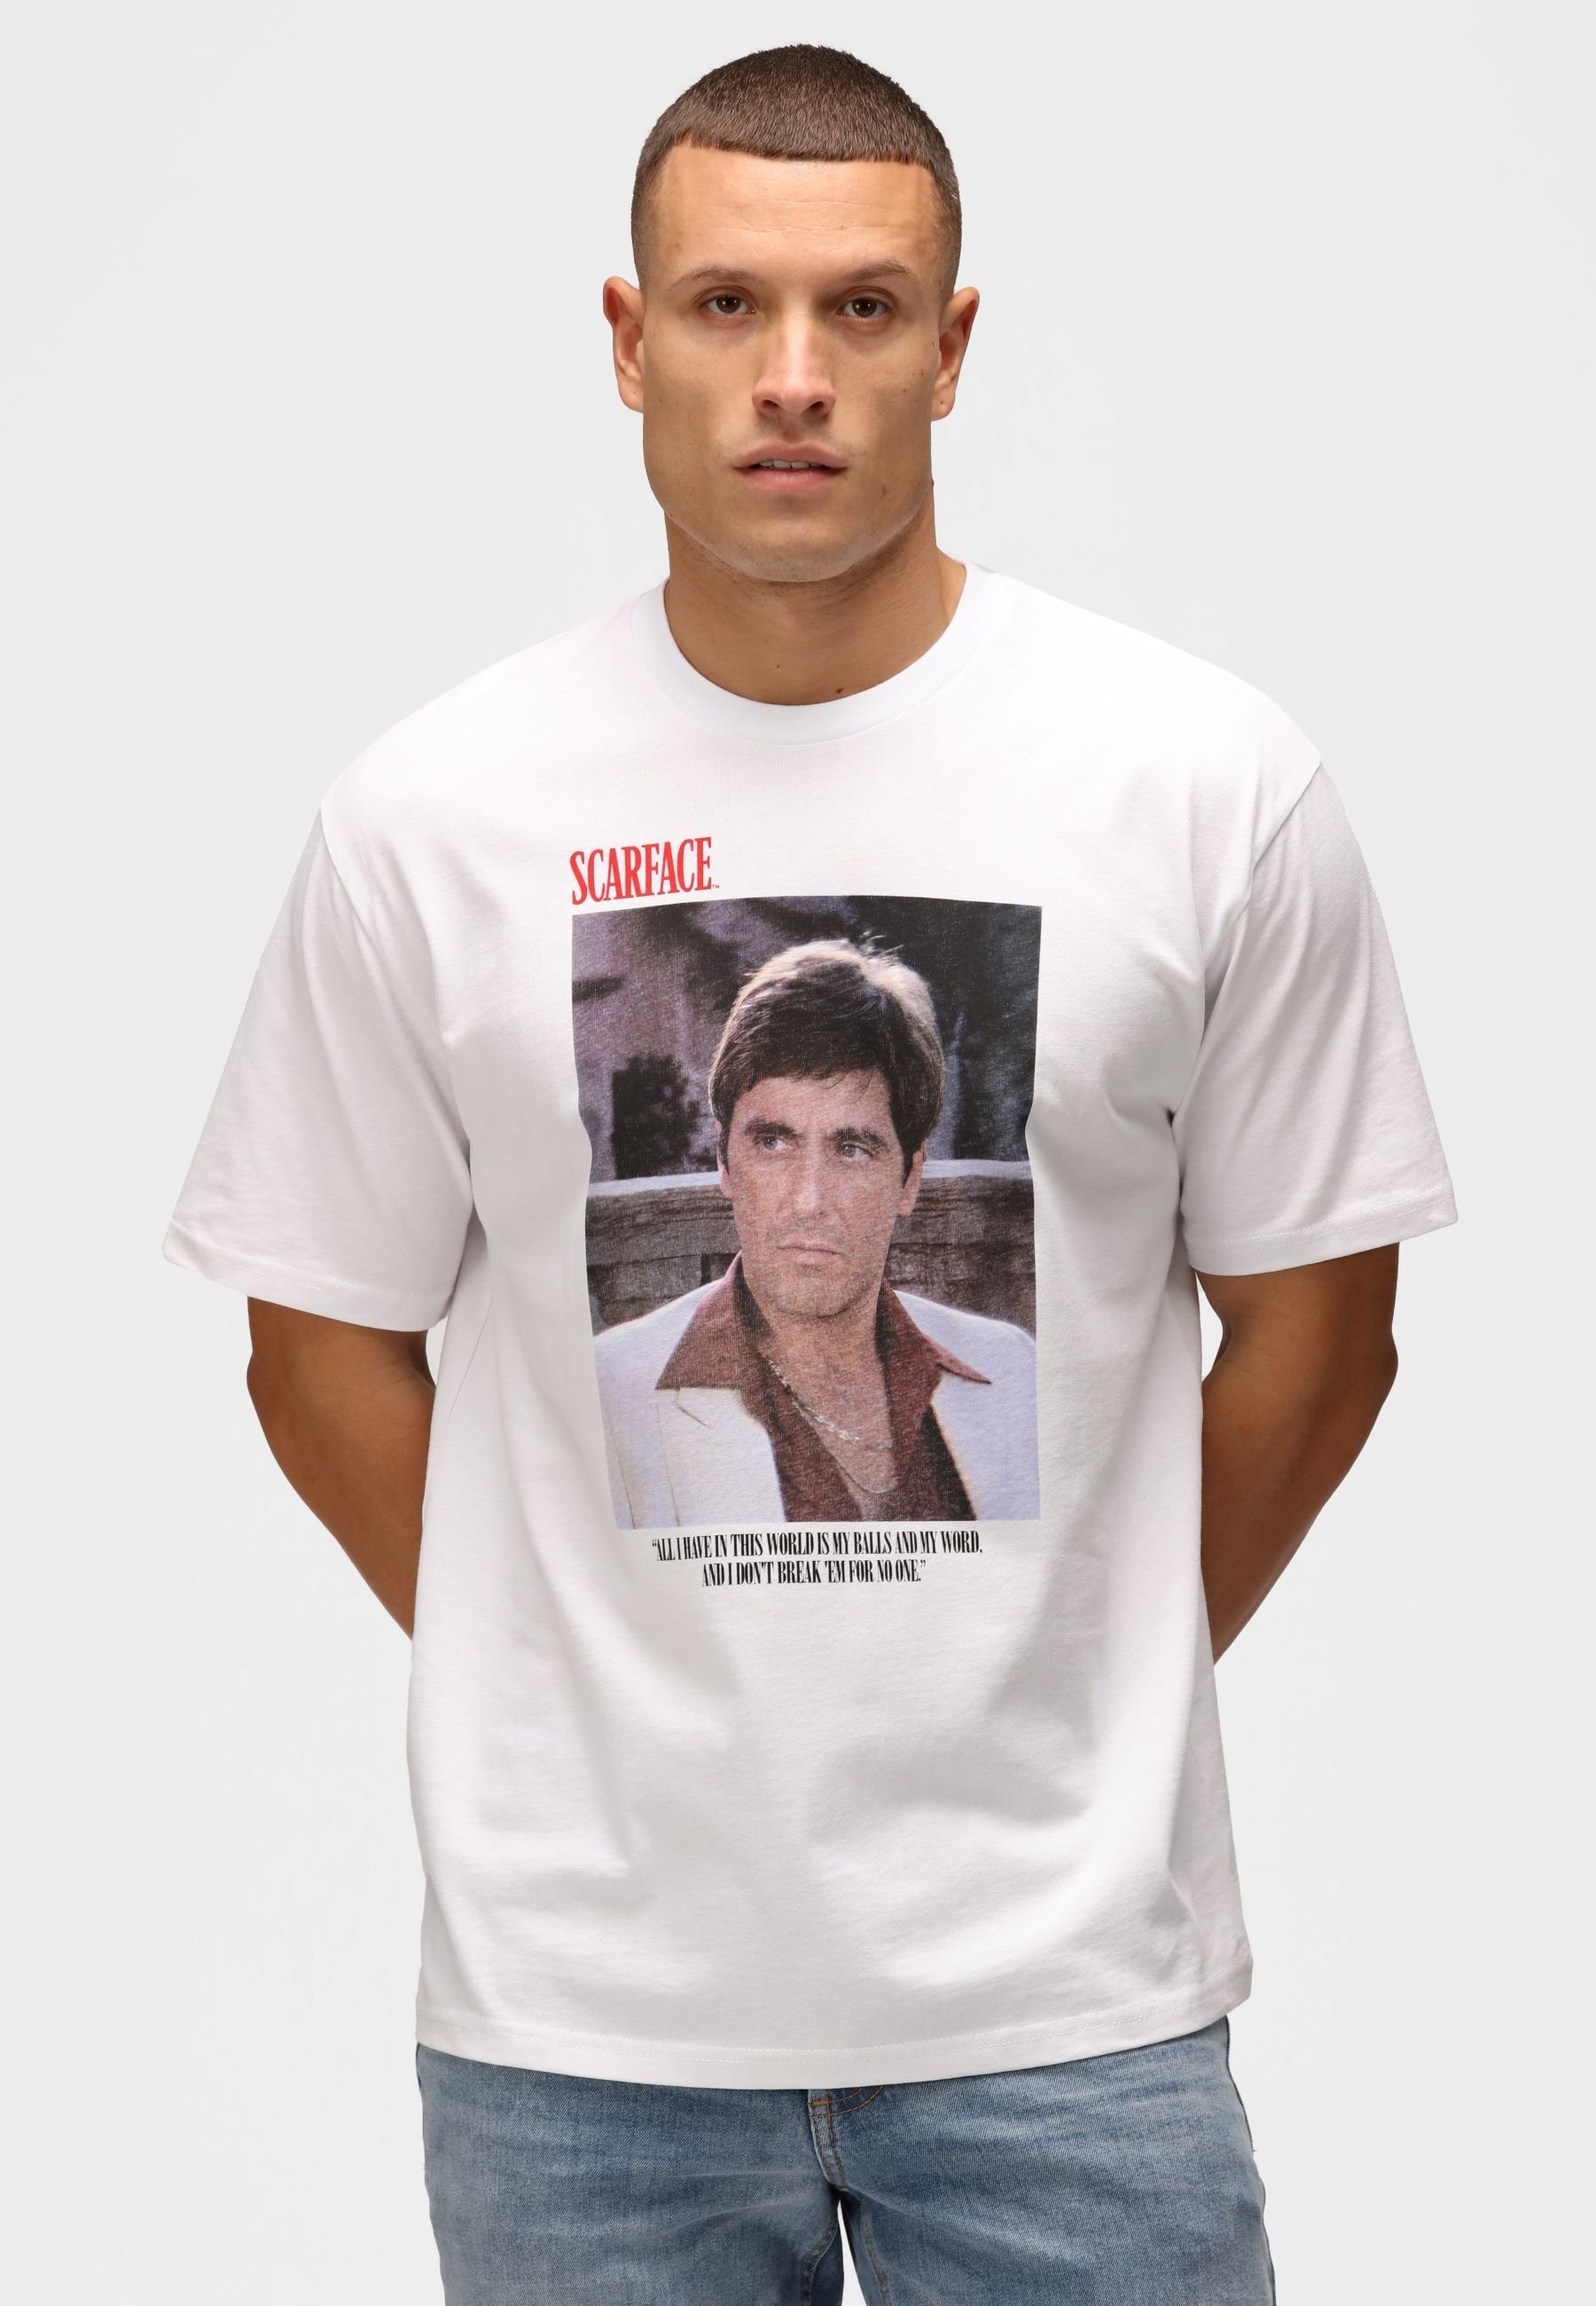 this I 'All in GOTS have world' zertifizierte Recovered Bio-Baumwolle T-Shirt Scarface